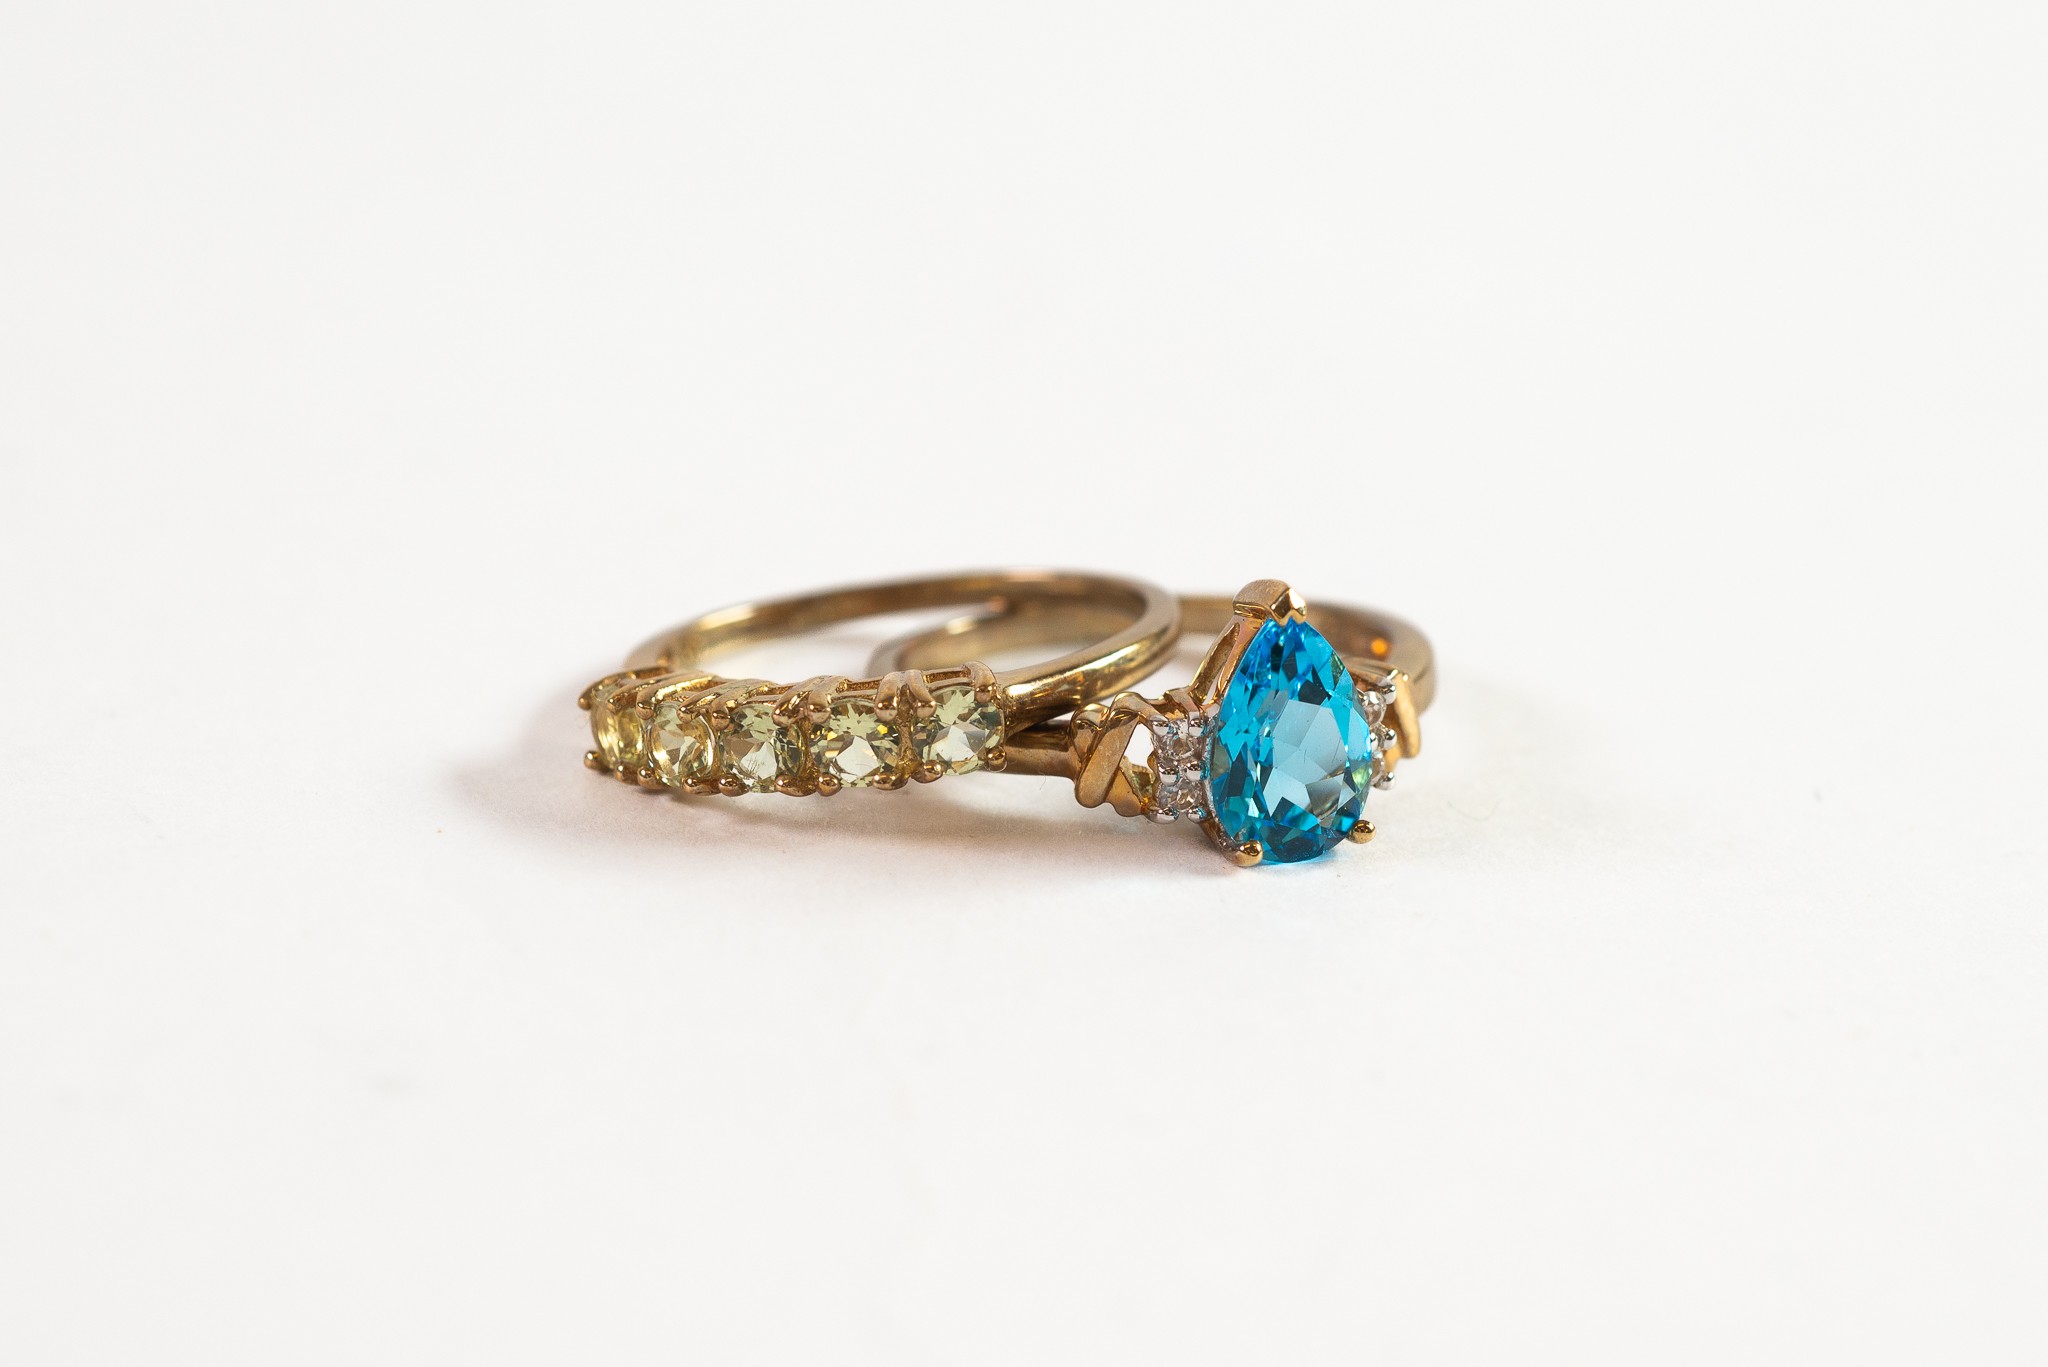 9ct GOLD RING set with tear shaped blue topaz with two tiny diamonds to each shoulder; and 9ct